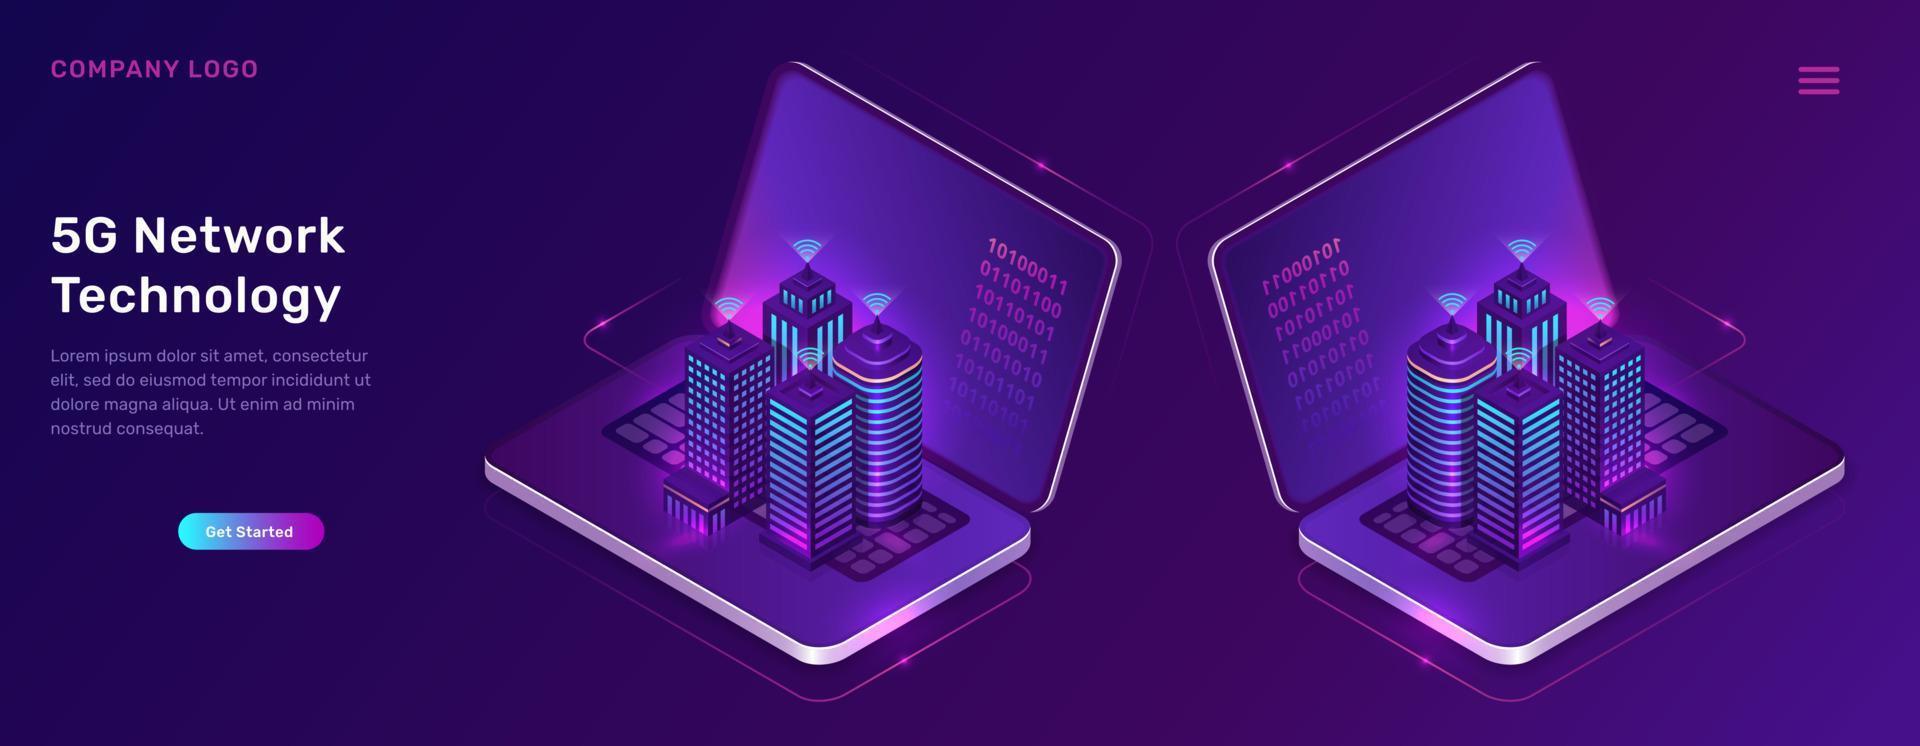 5G network technology, isometric concept vector